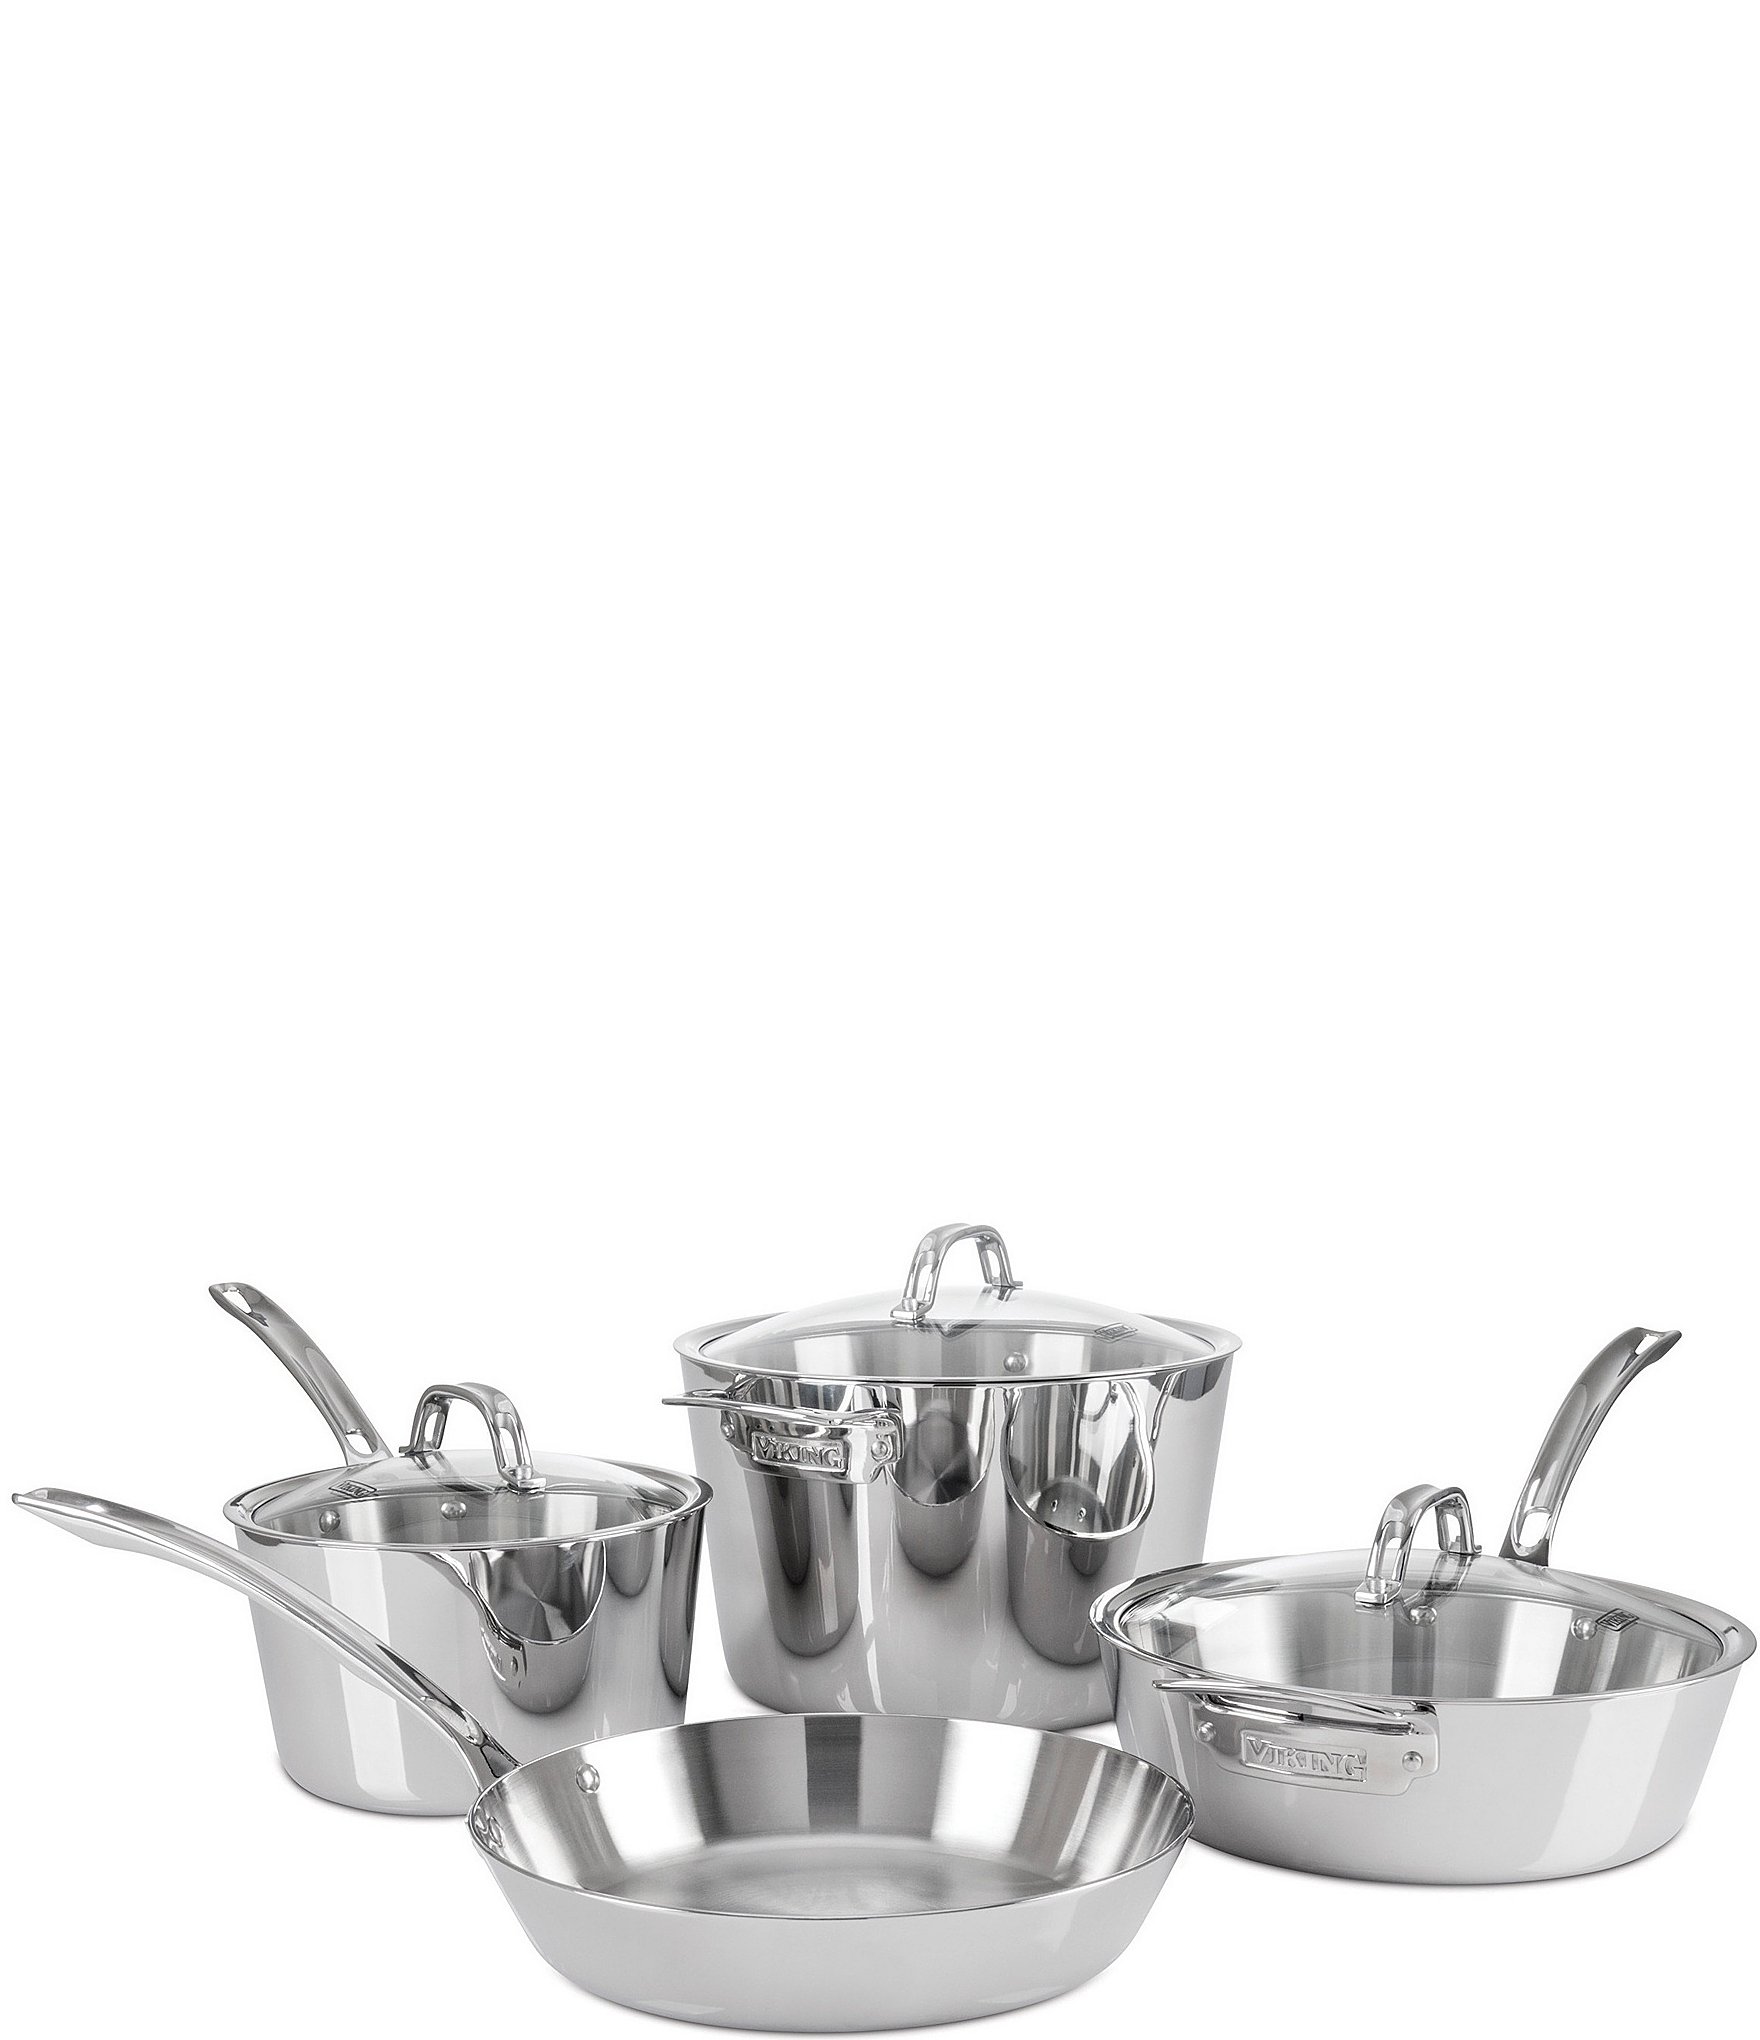 https://dimg.dillards.com/is/image/DillardsZoom/zoom/viking-contemporary-3-ply--stainless-steel-7-piece-cookware-set/20028159_zi.jpg